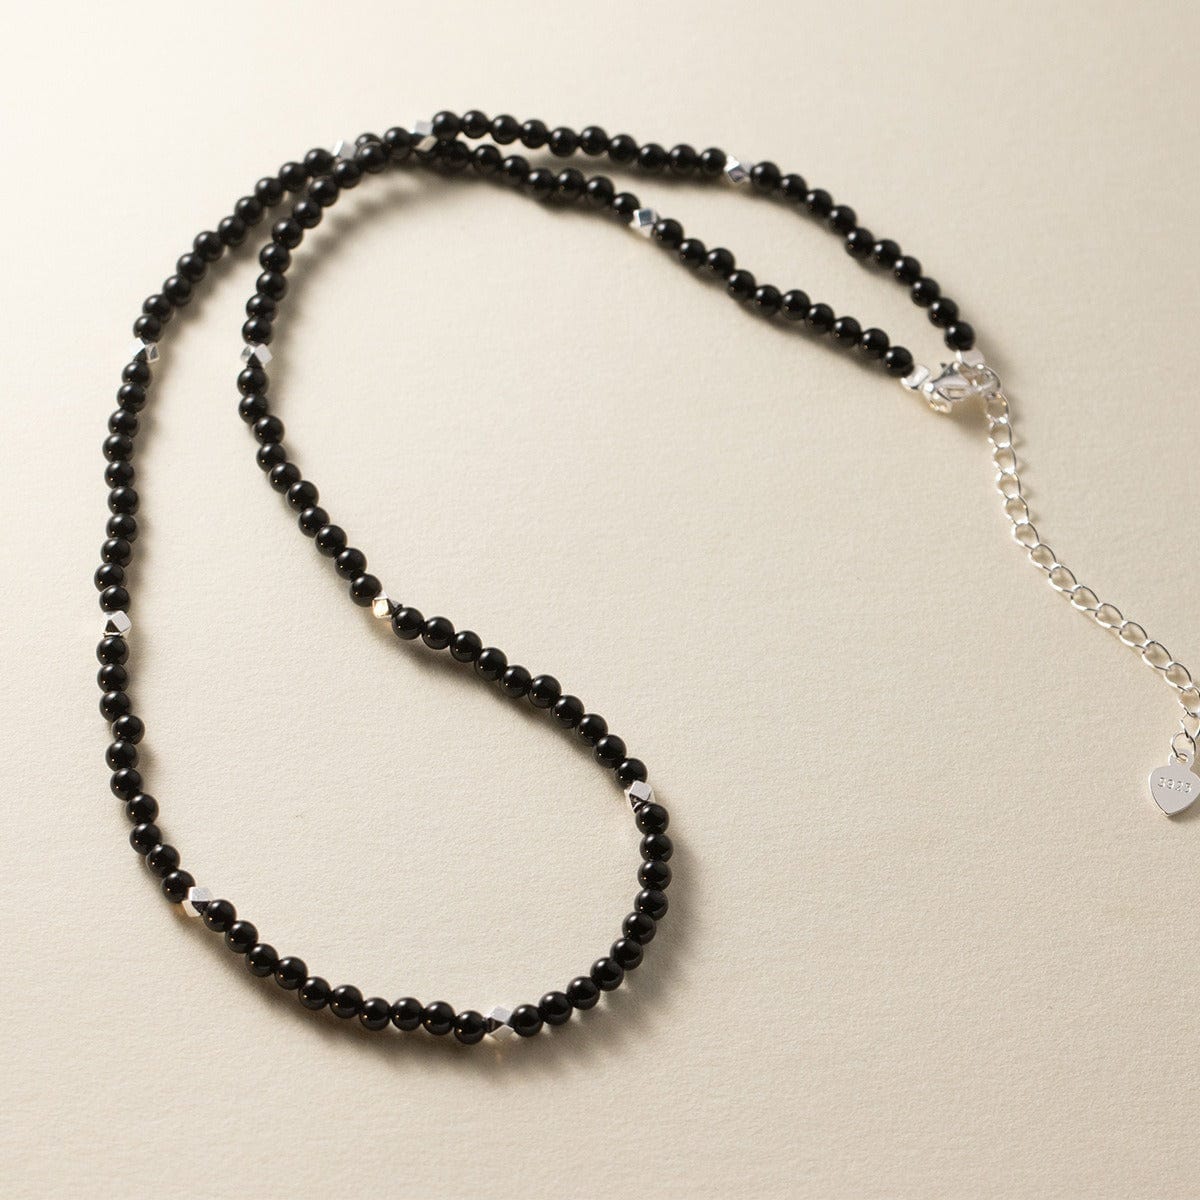 Necklace - Women's S925 Sterling Silver Black Agate Necklace